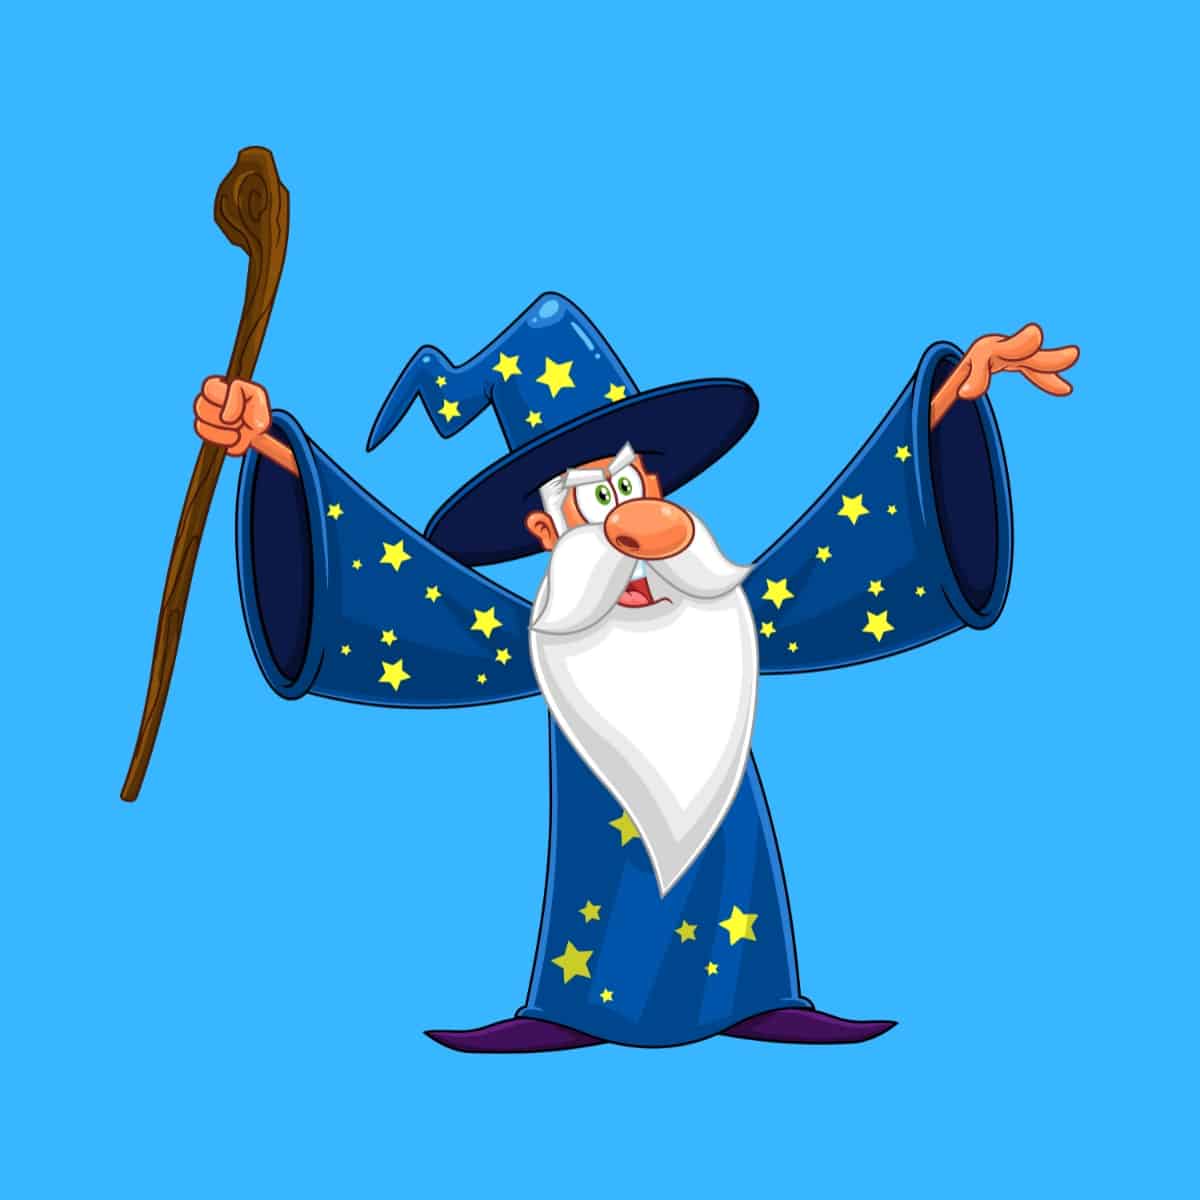 Cartoon graphic of a wizard with both arms up in the air about to cast a spell on a blue background.